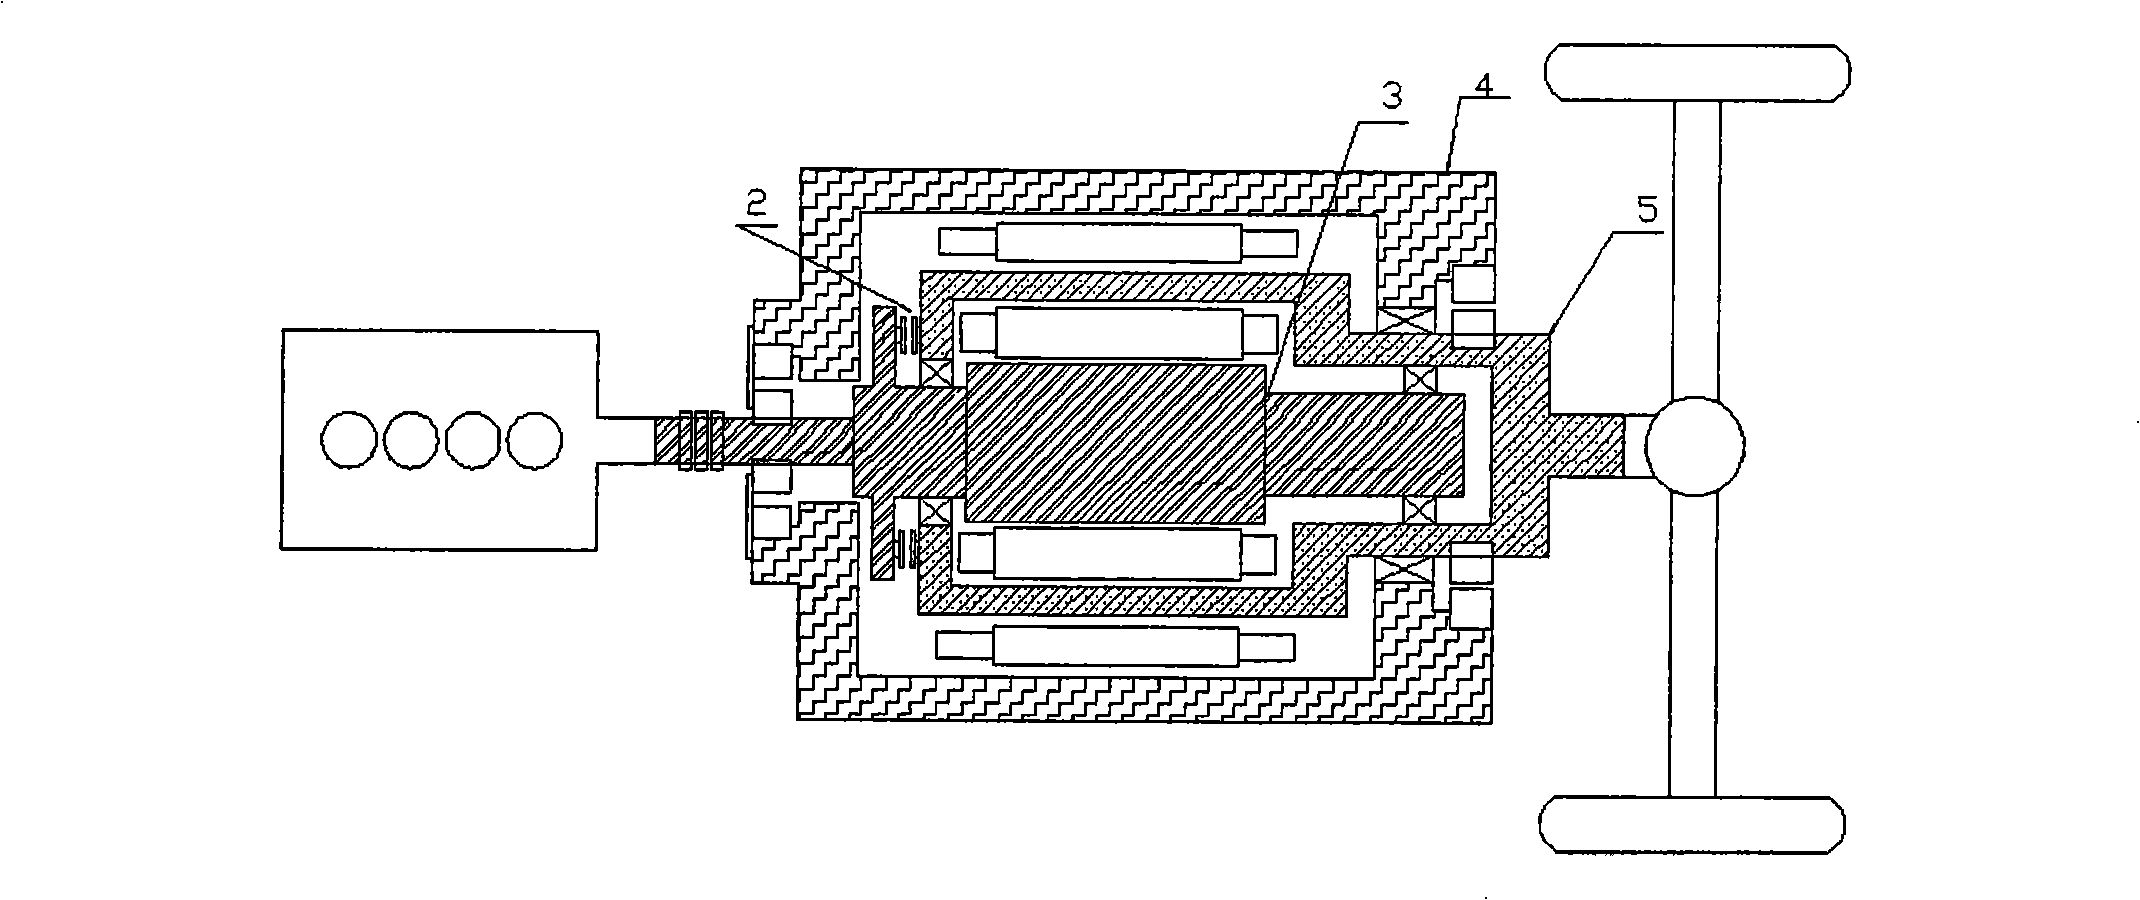 Control method for hybrid power automobile equipped with two mechanical end motors